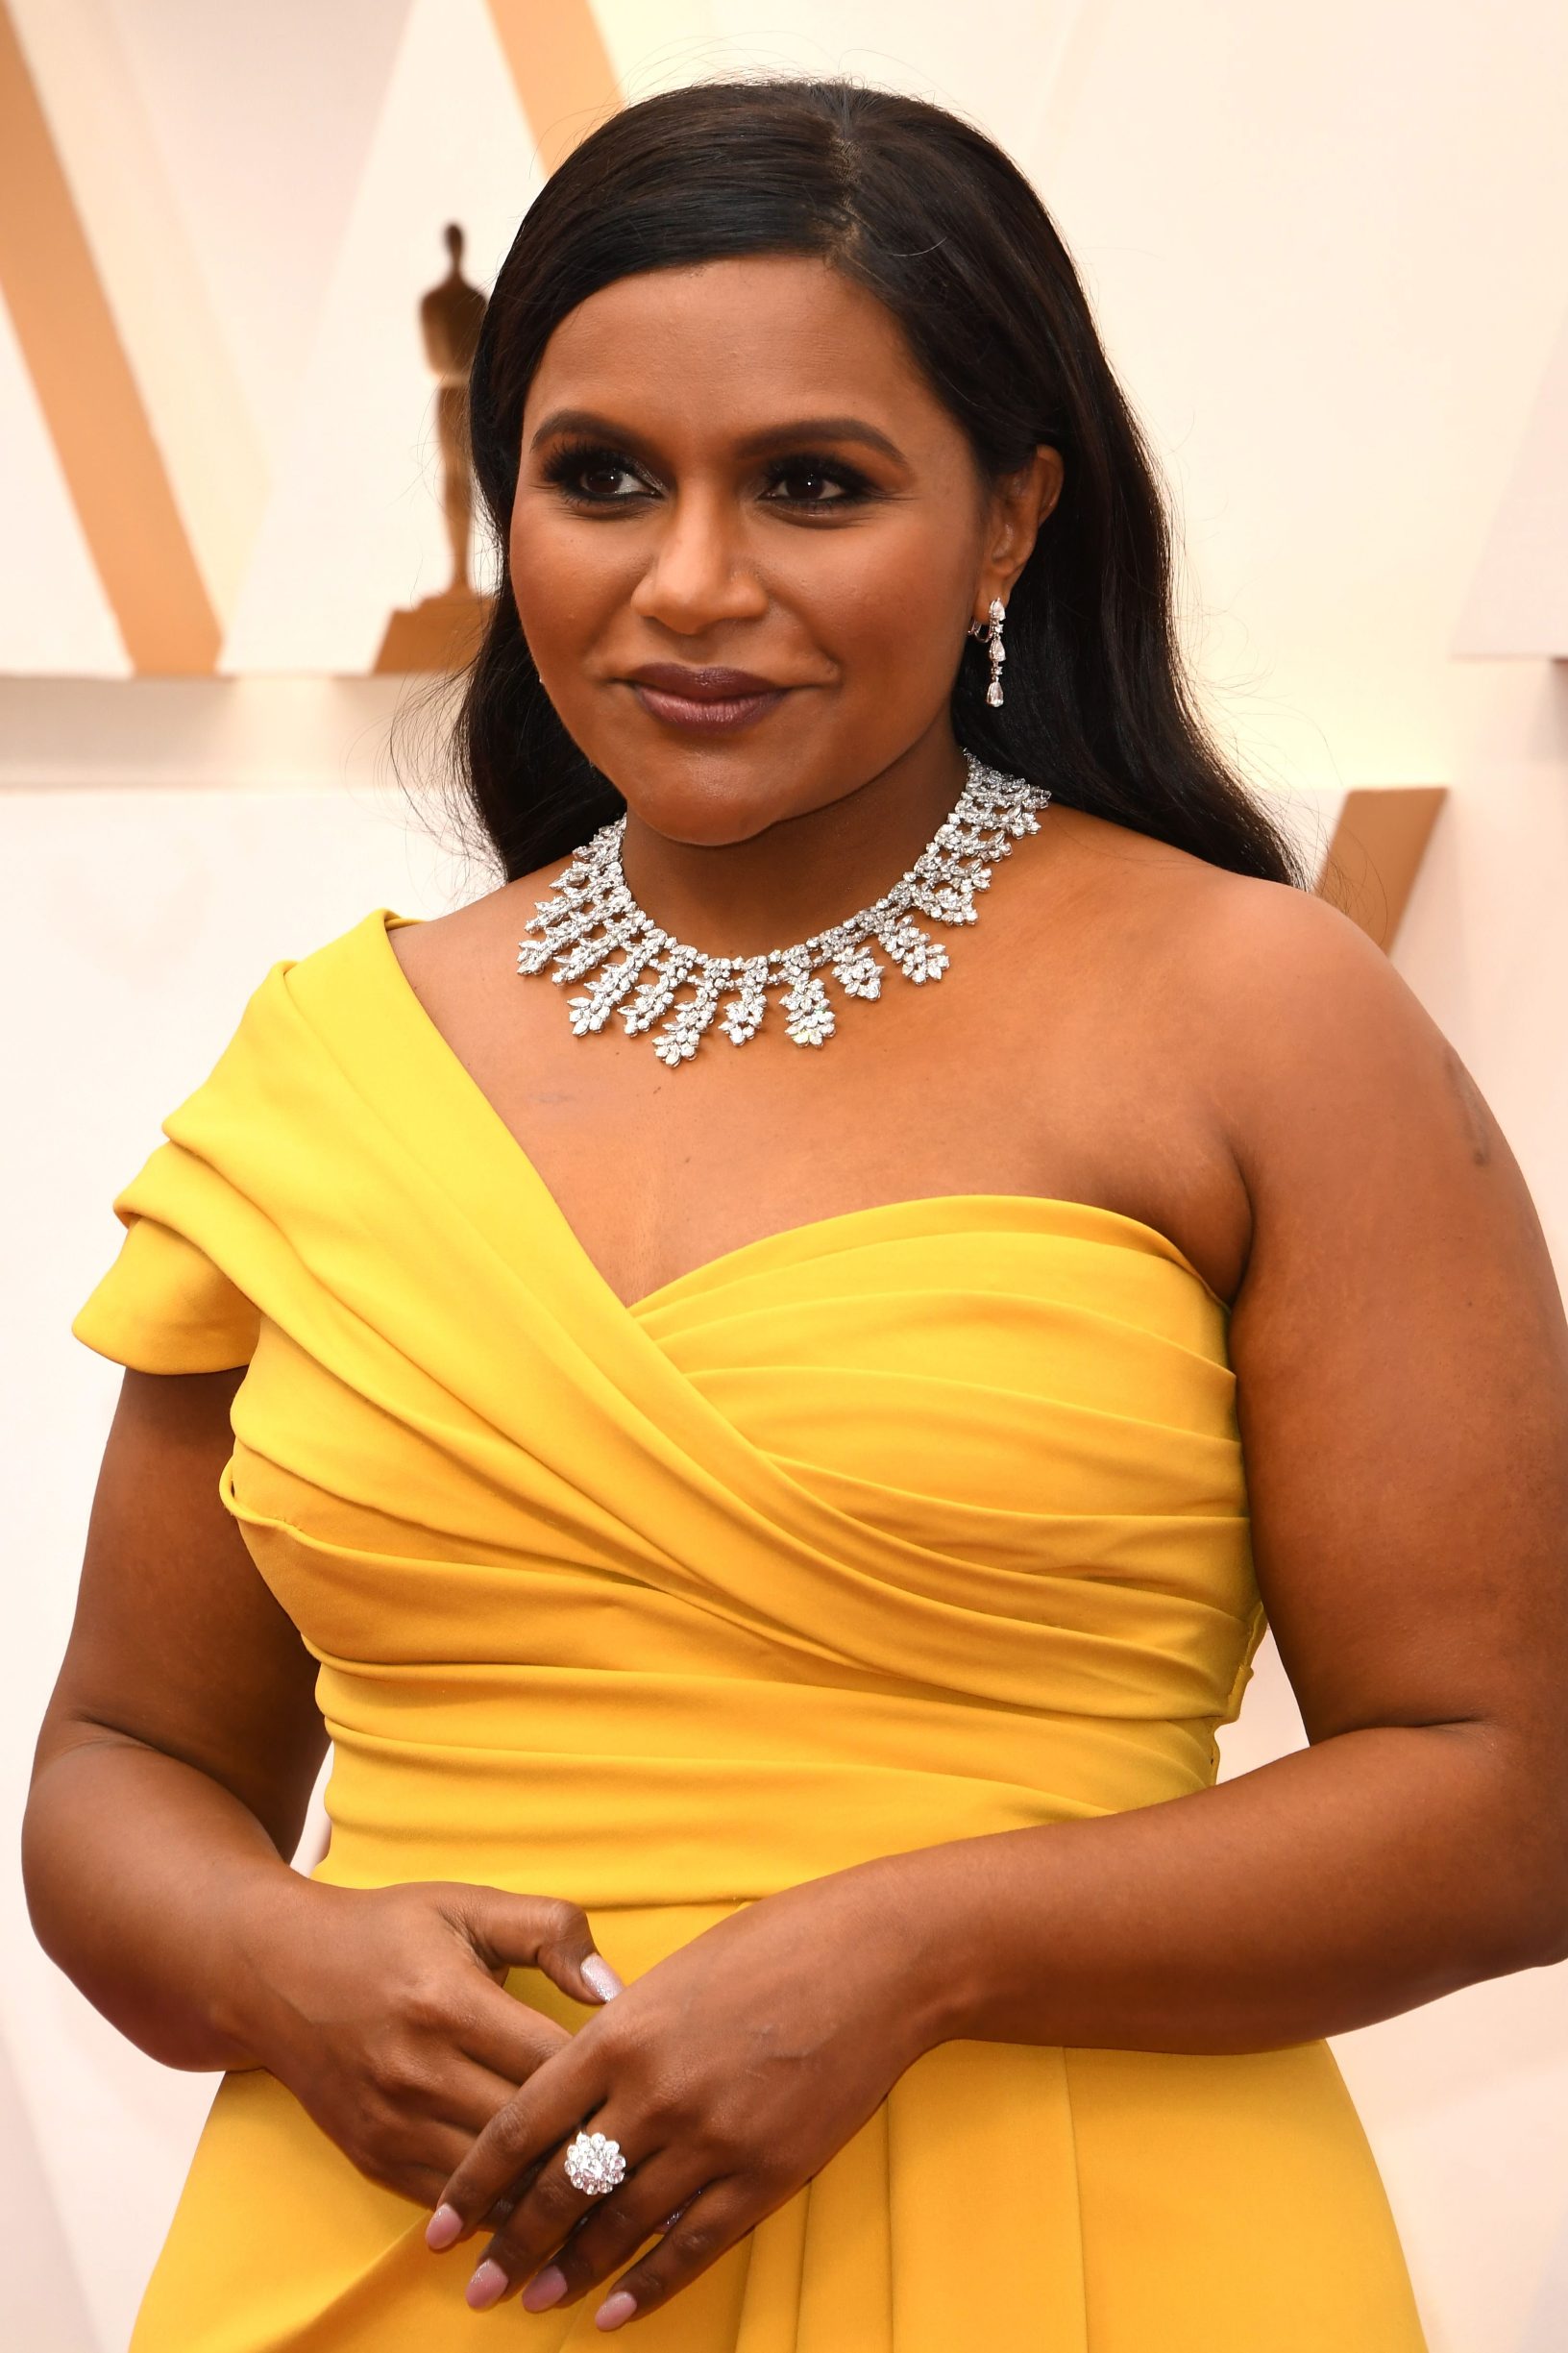 US actress Mindy Kaling arrives for the 92nd Oscars at the Dolby Theatre in Hollywood, California on February 9, 2020. (Photo by Robyn Beck / AFP)